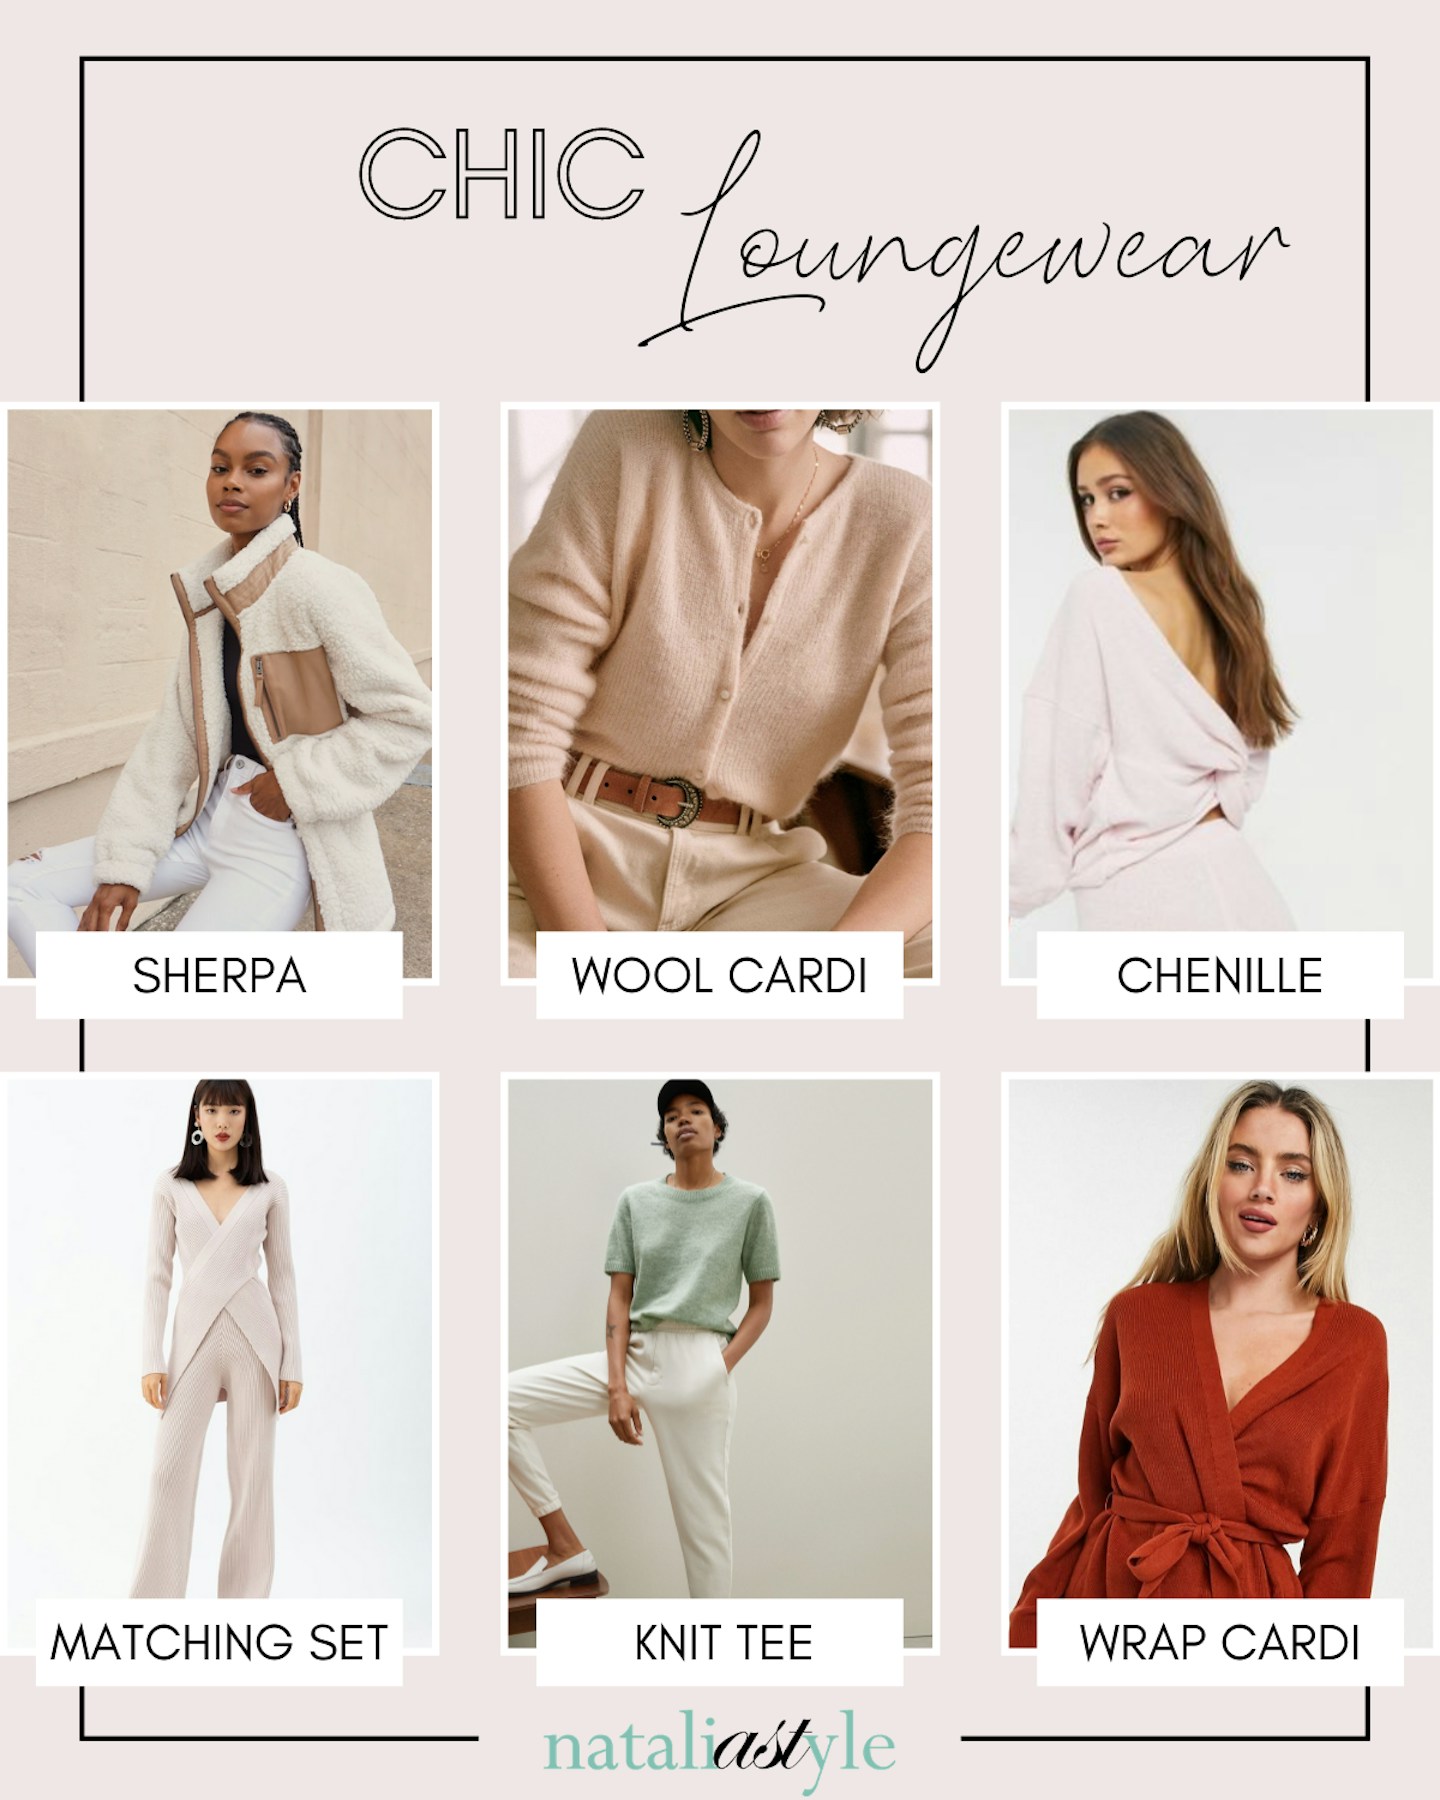 Looking for chic loungewear? I'm sharing a roundup of cozy clothes you can even wear on a zoom call. From chic cardigans to knit sweats, it's time to up your stay at home wardrobe game!